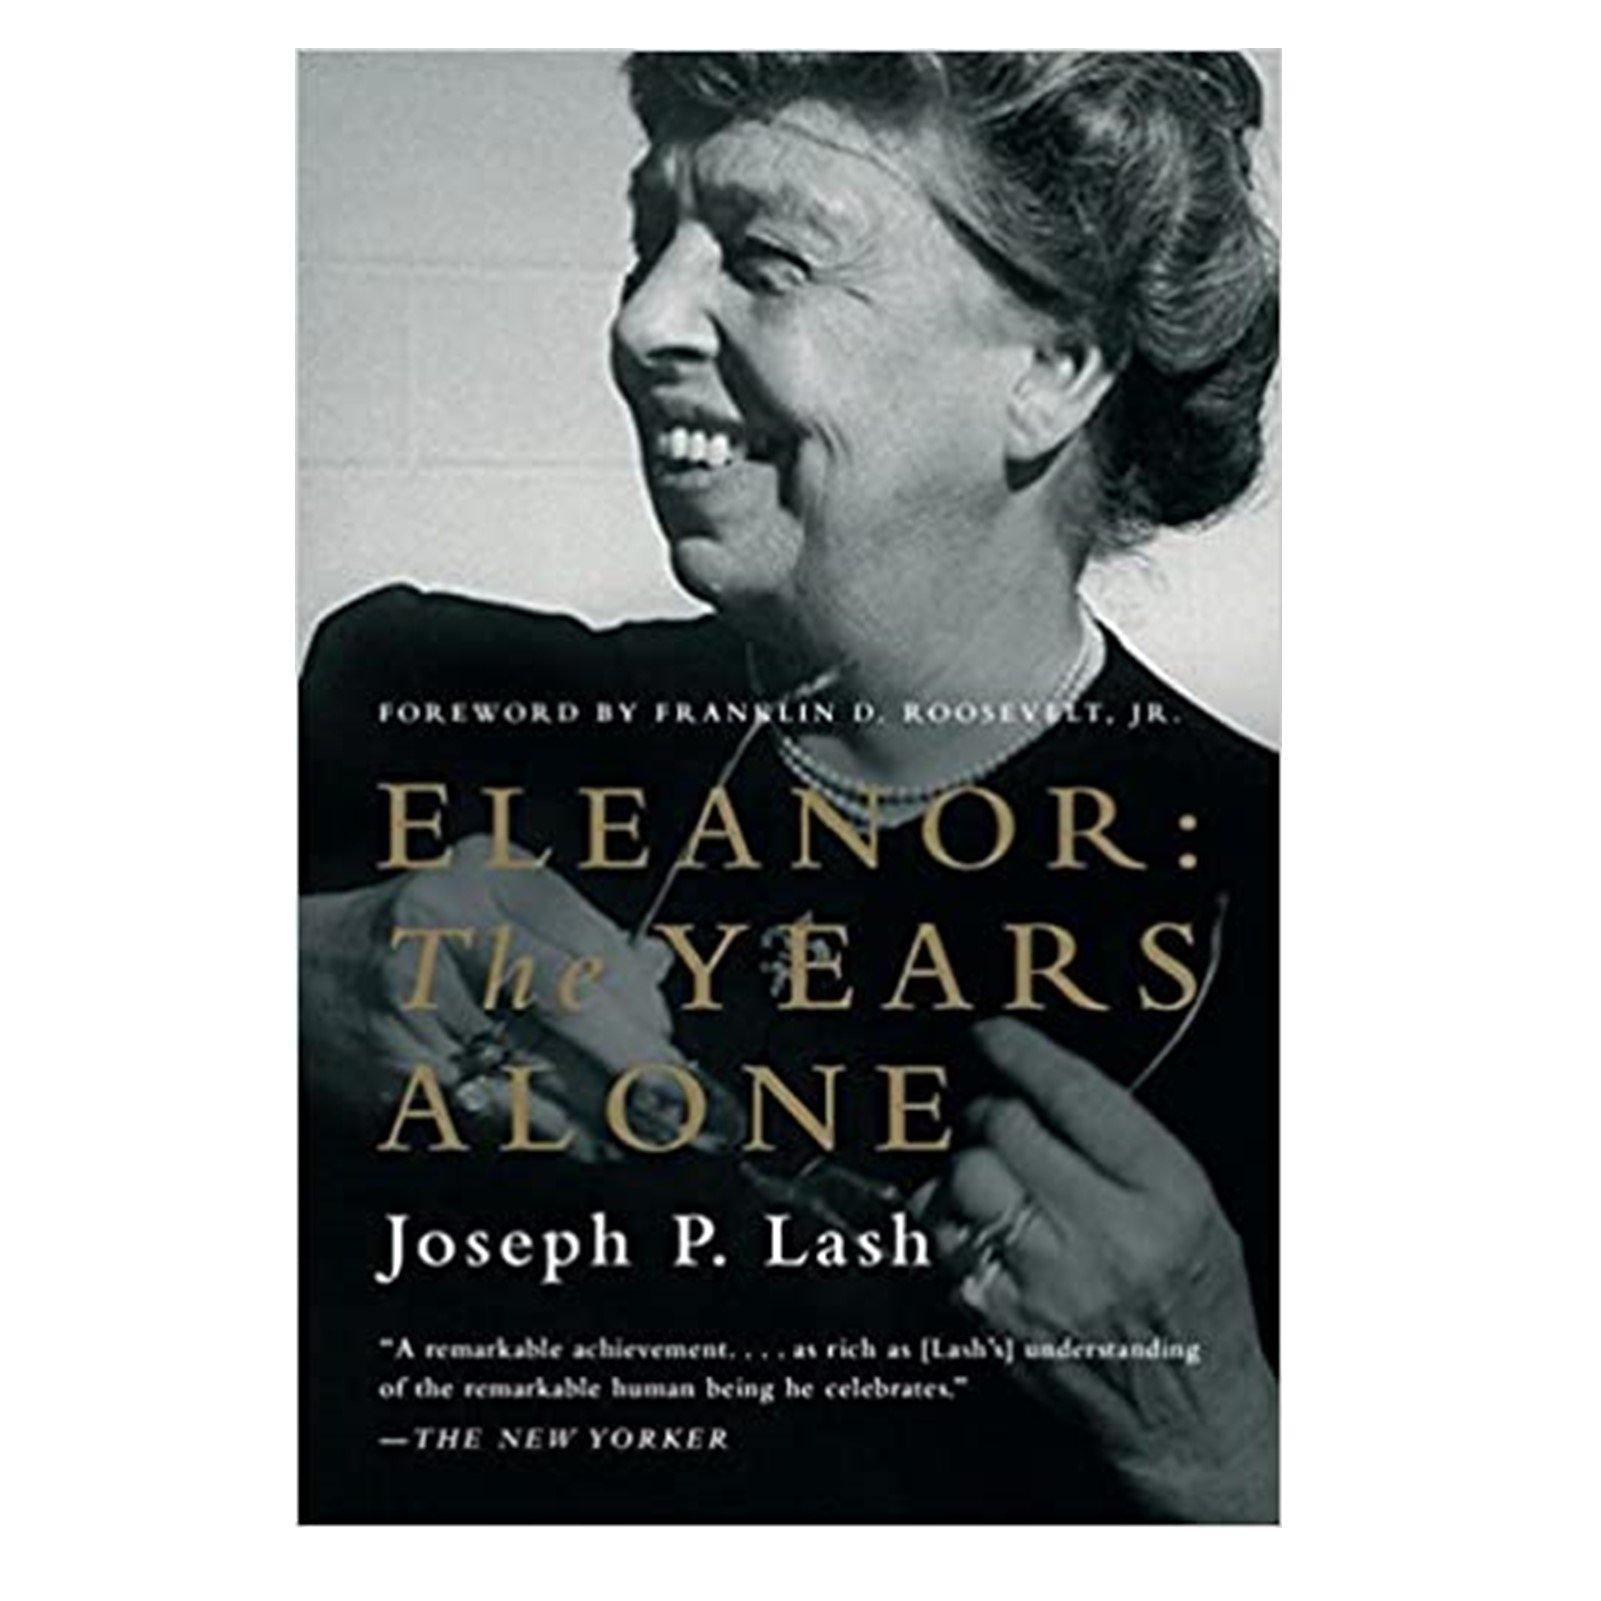 Eleanor:  The Years Alone - Library of Congress Shop